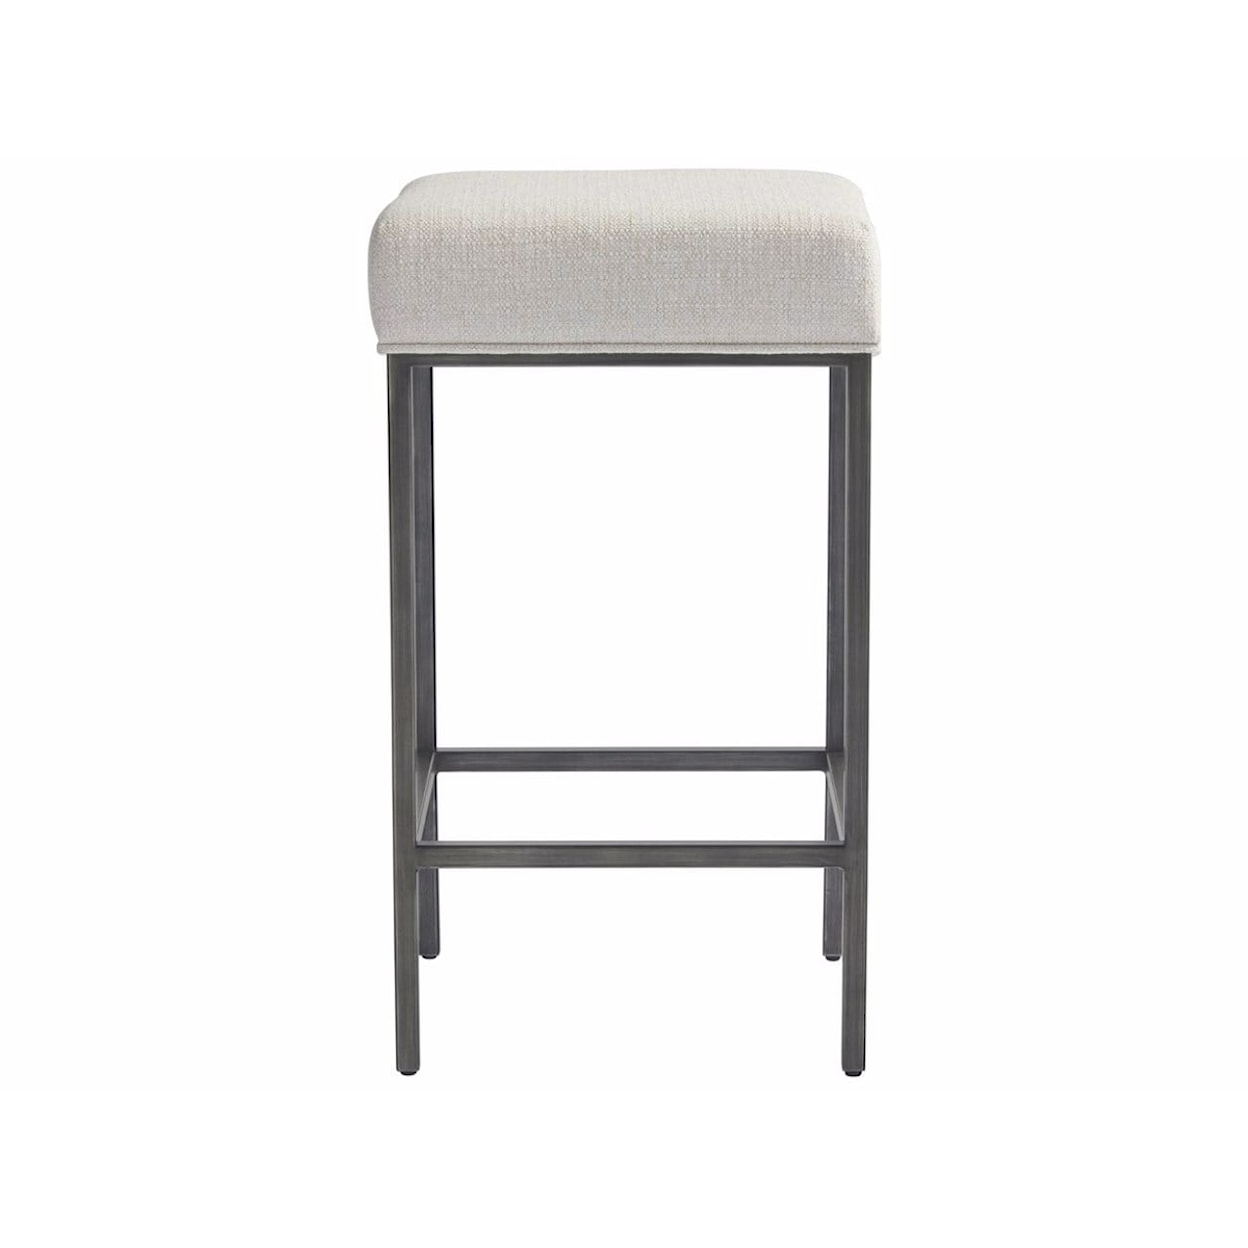 Universal Curated Console Table with 3 Stools